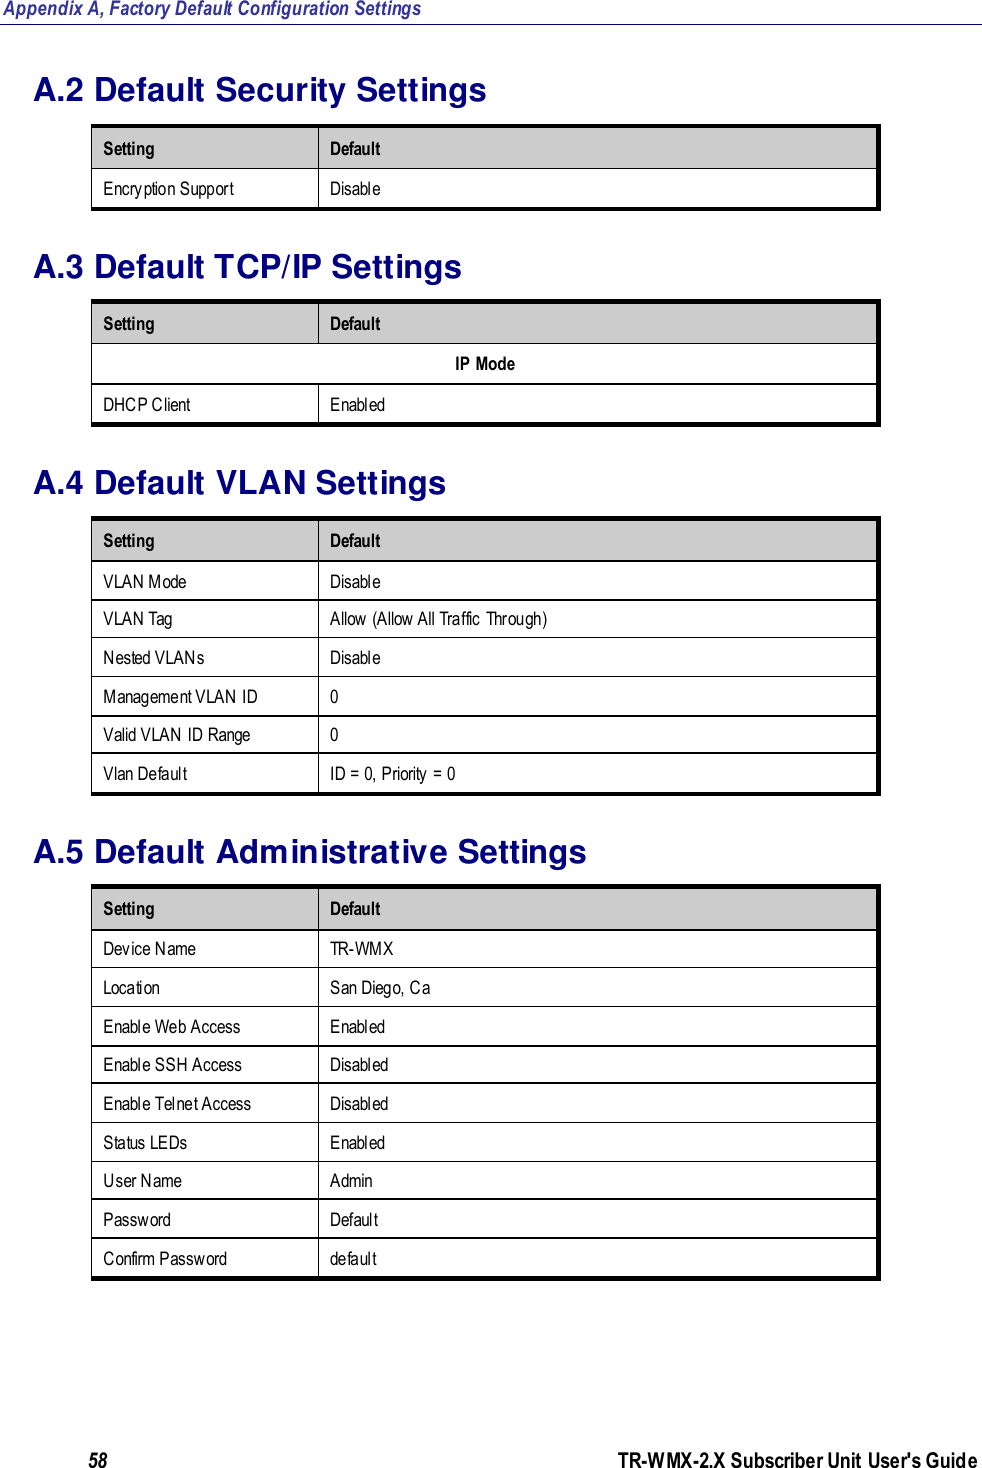 Appendix A, Factory Default Configuration Settings 58               TR-WMX-2.X Subscriber Unit User&apos;s Guide  A.2 Default Security Settings Setting Default Encryption Support Disable A.3 Default TCP/IP Settings Setting Default IP Mode DHCP Client Enabled A.4 Default VLAN Settings Setting Default VLAN Mode Disable VLAN Tag Allow (Allow All Traffic Through) Nested VLANs Disable Management VLAN ID 0 Valid VLAN ID Range 0 Vlan Default ID = 0, Priority = 0 A.5 Default Administrative Settings Setting Default Device Name TR-WMX Location San Diego, Ca Enable Web Access Enabled Enable SSH Access Disabled Enable Telnet Access Disabled Status LEDs Enabled User Name Admin Password Default Confirm Password default 